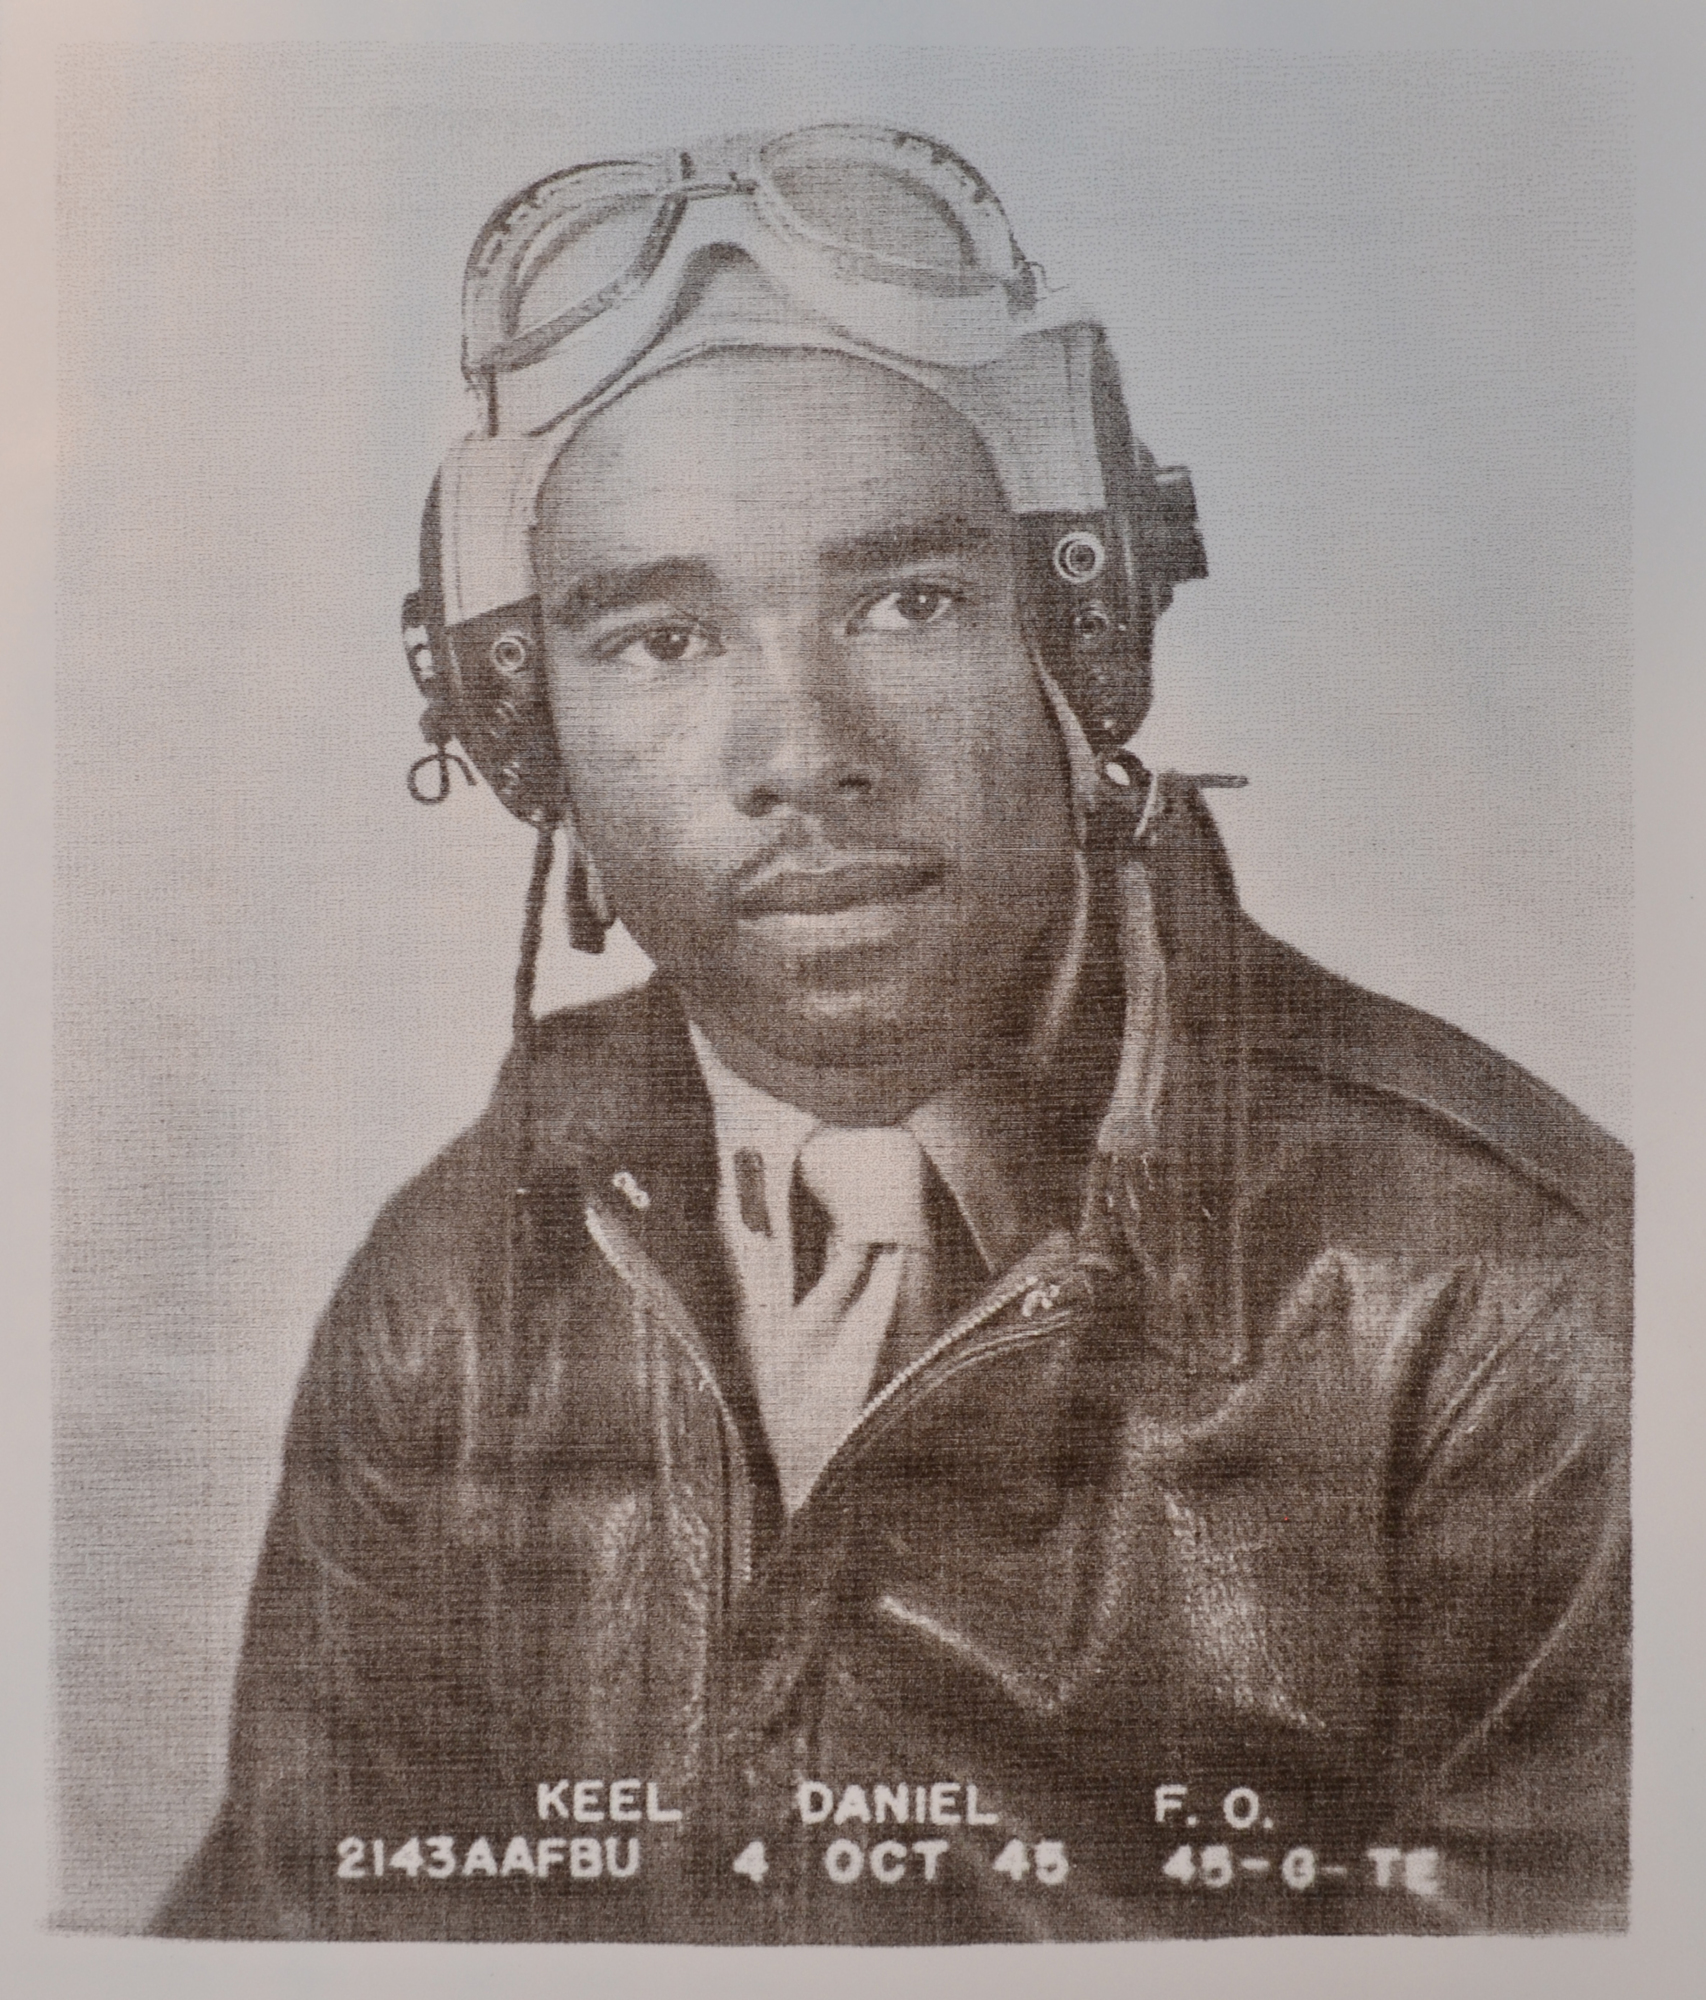 Daniel Keel helped pave the way for black Americans to fully serve in the U.S. military.